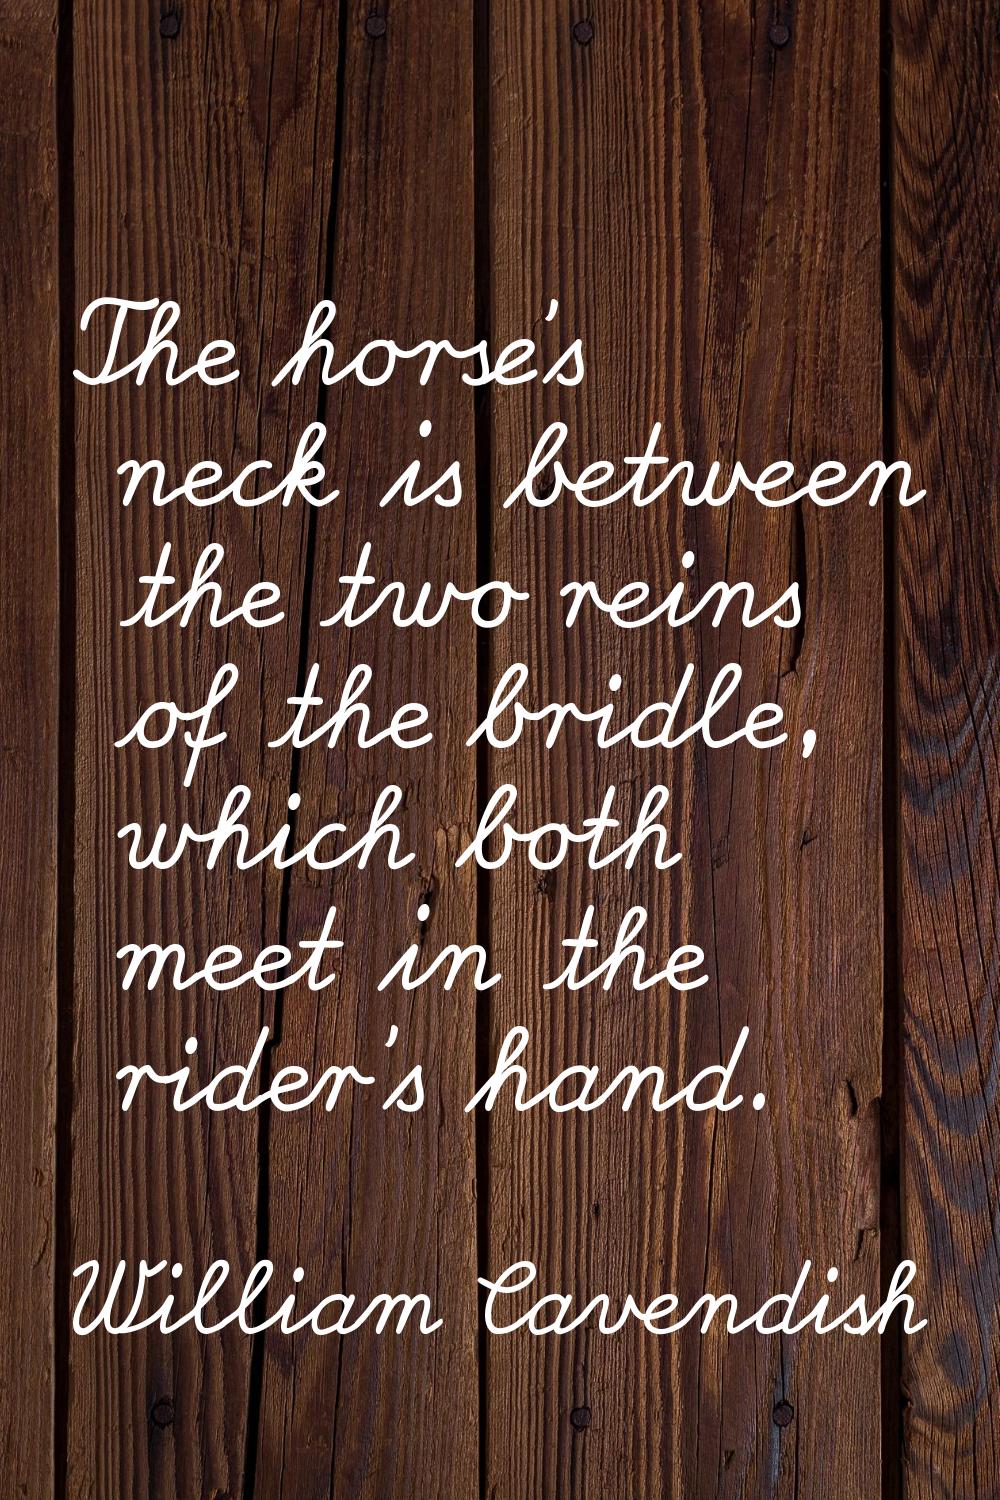 The horse's neck is between the two reins of the bridle, which both meet in the rider's hand.